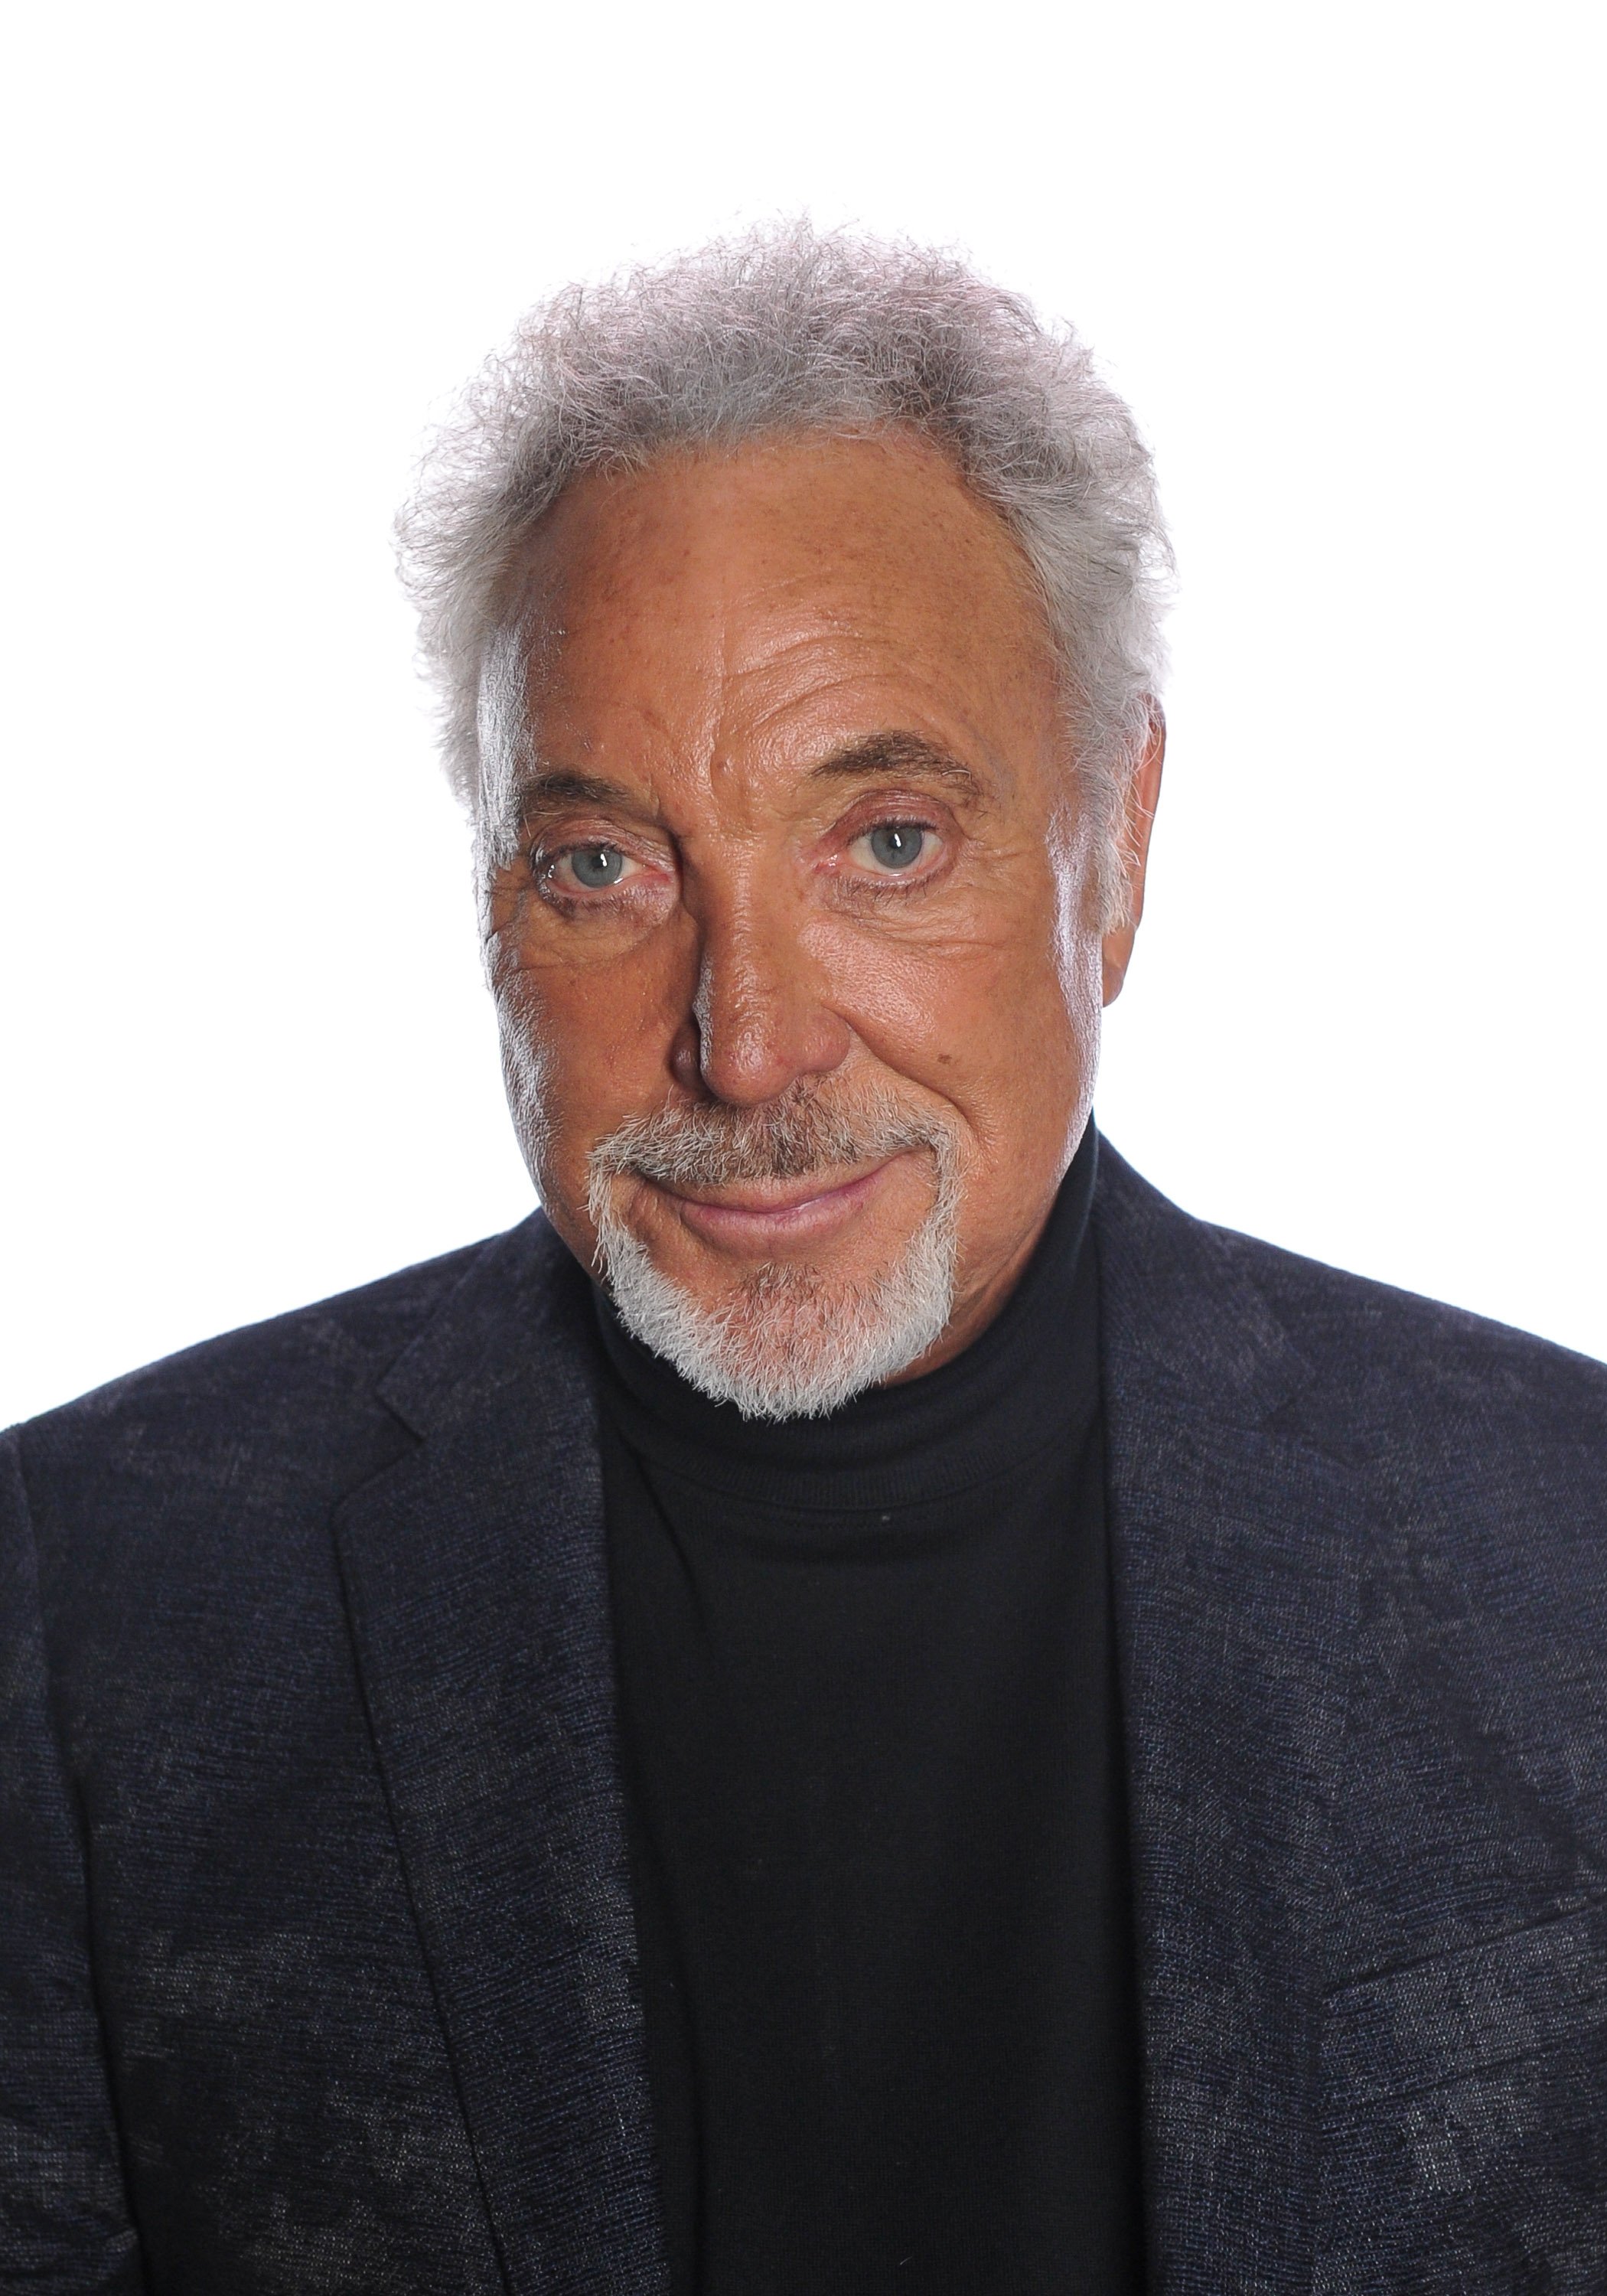 Sir Tom Jones promotes his new book "Over The Top And Back: The Autobiography" at The Opera House on November 25, 2015 in Toronto, Canada. | Source: Getty Images